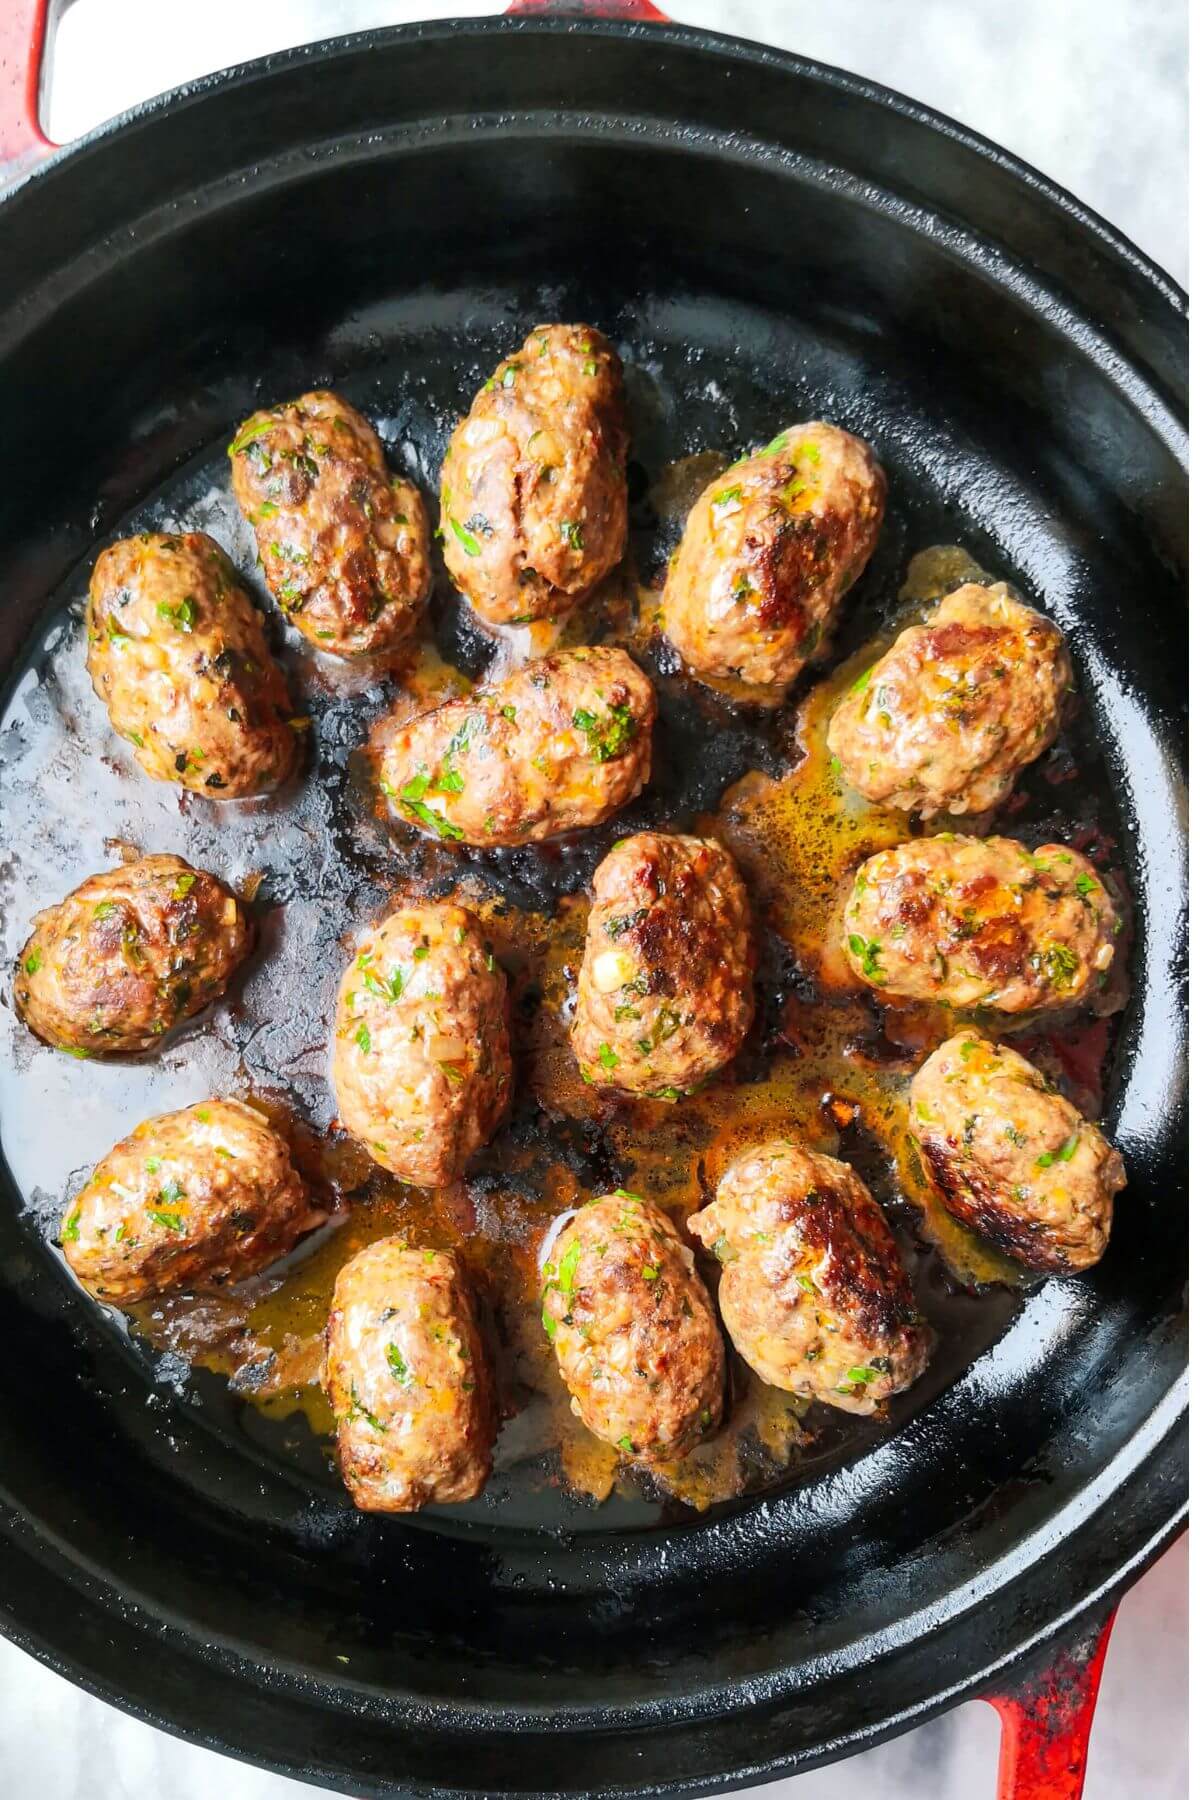 Cooked and golden lamb kofta sitting in a black skillet.